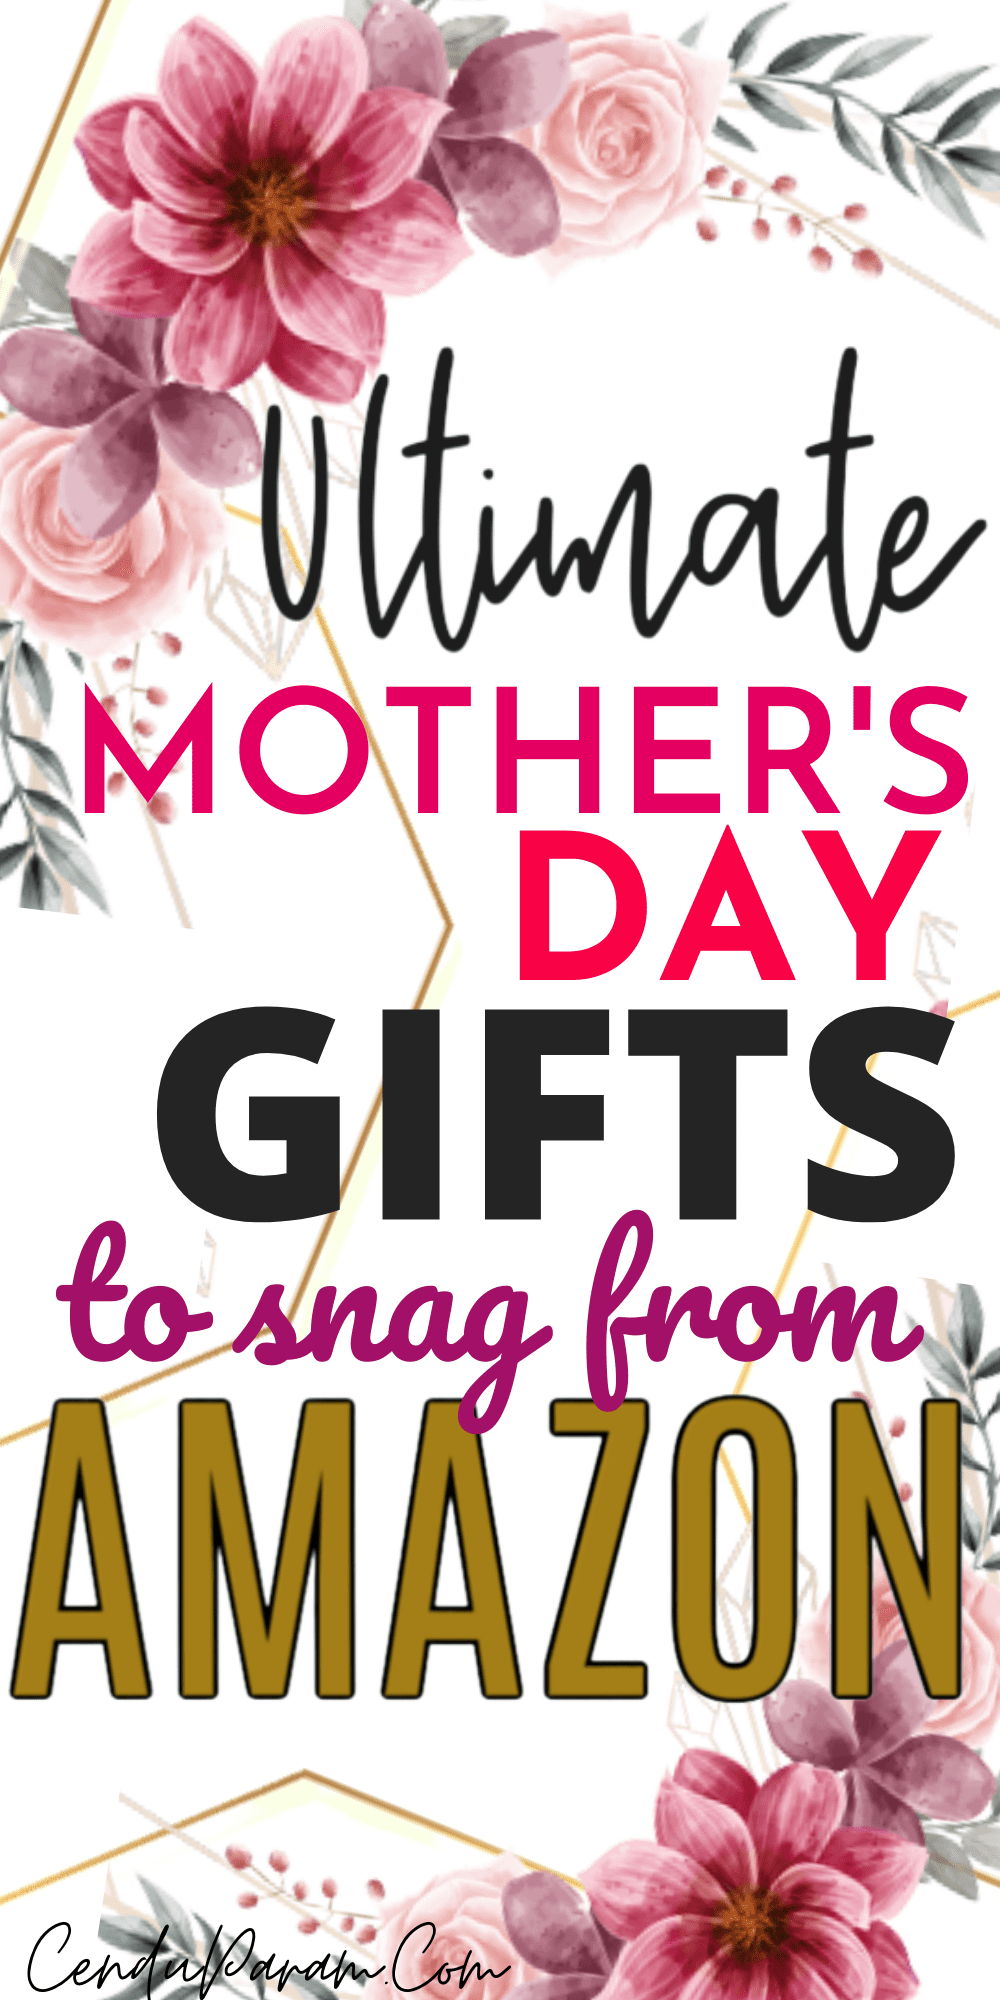 Mother's Day Gifts For Mom From Amazon